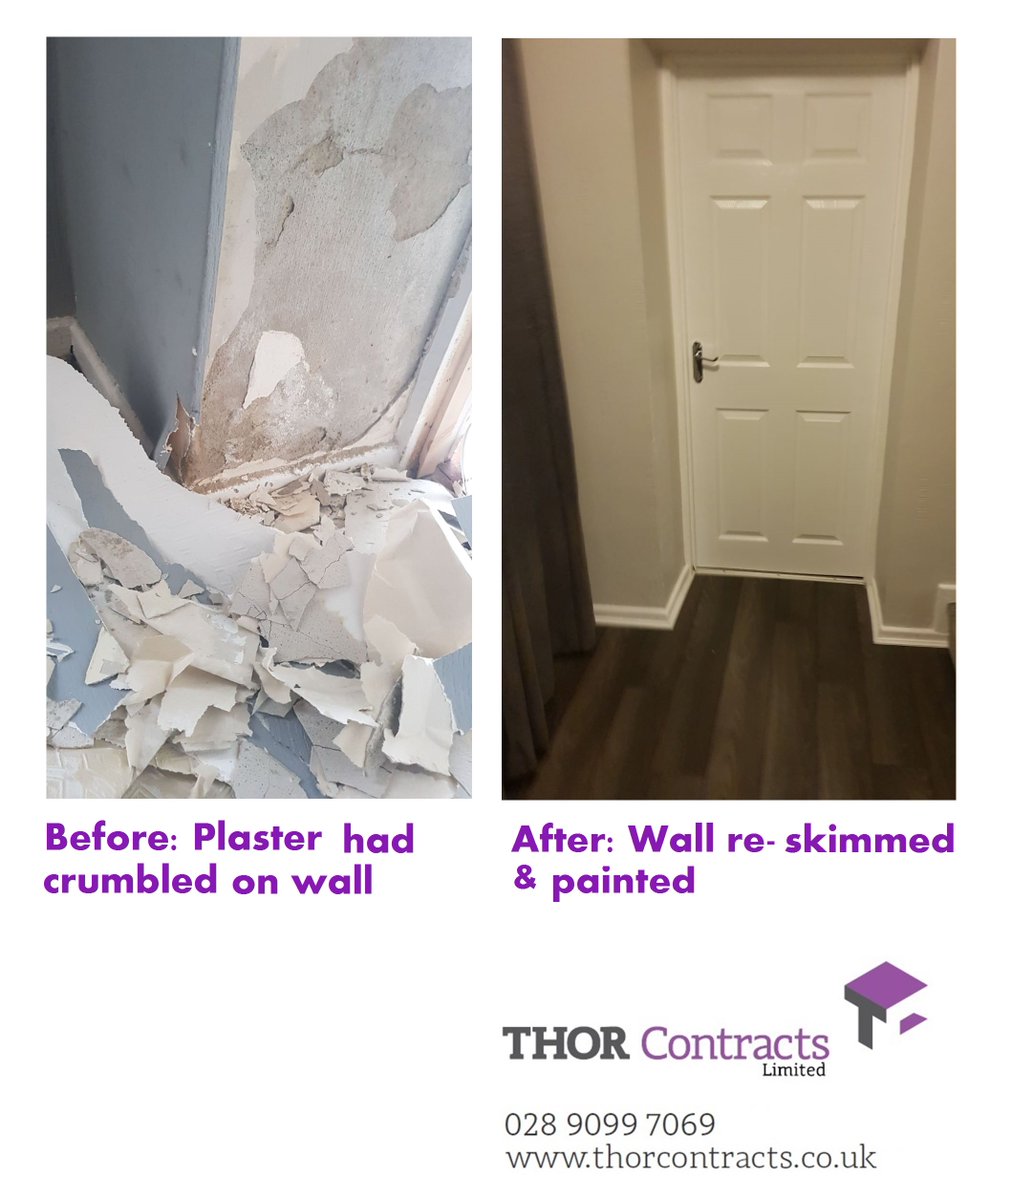 #Beforeandafters of a family home we freshened up in prep for their newest addition!We painted walls,woodwork&radiators,laid carpet &wooden flooring.The family were very happy with the finished work&we were very happy to hear of the safe arrival of their baby boy!
👶🏻 #TeamThor